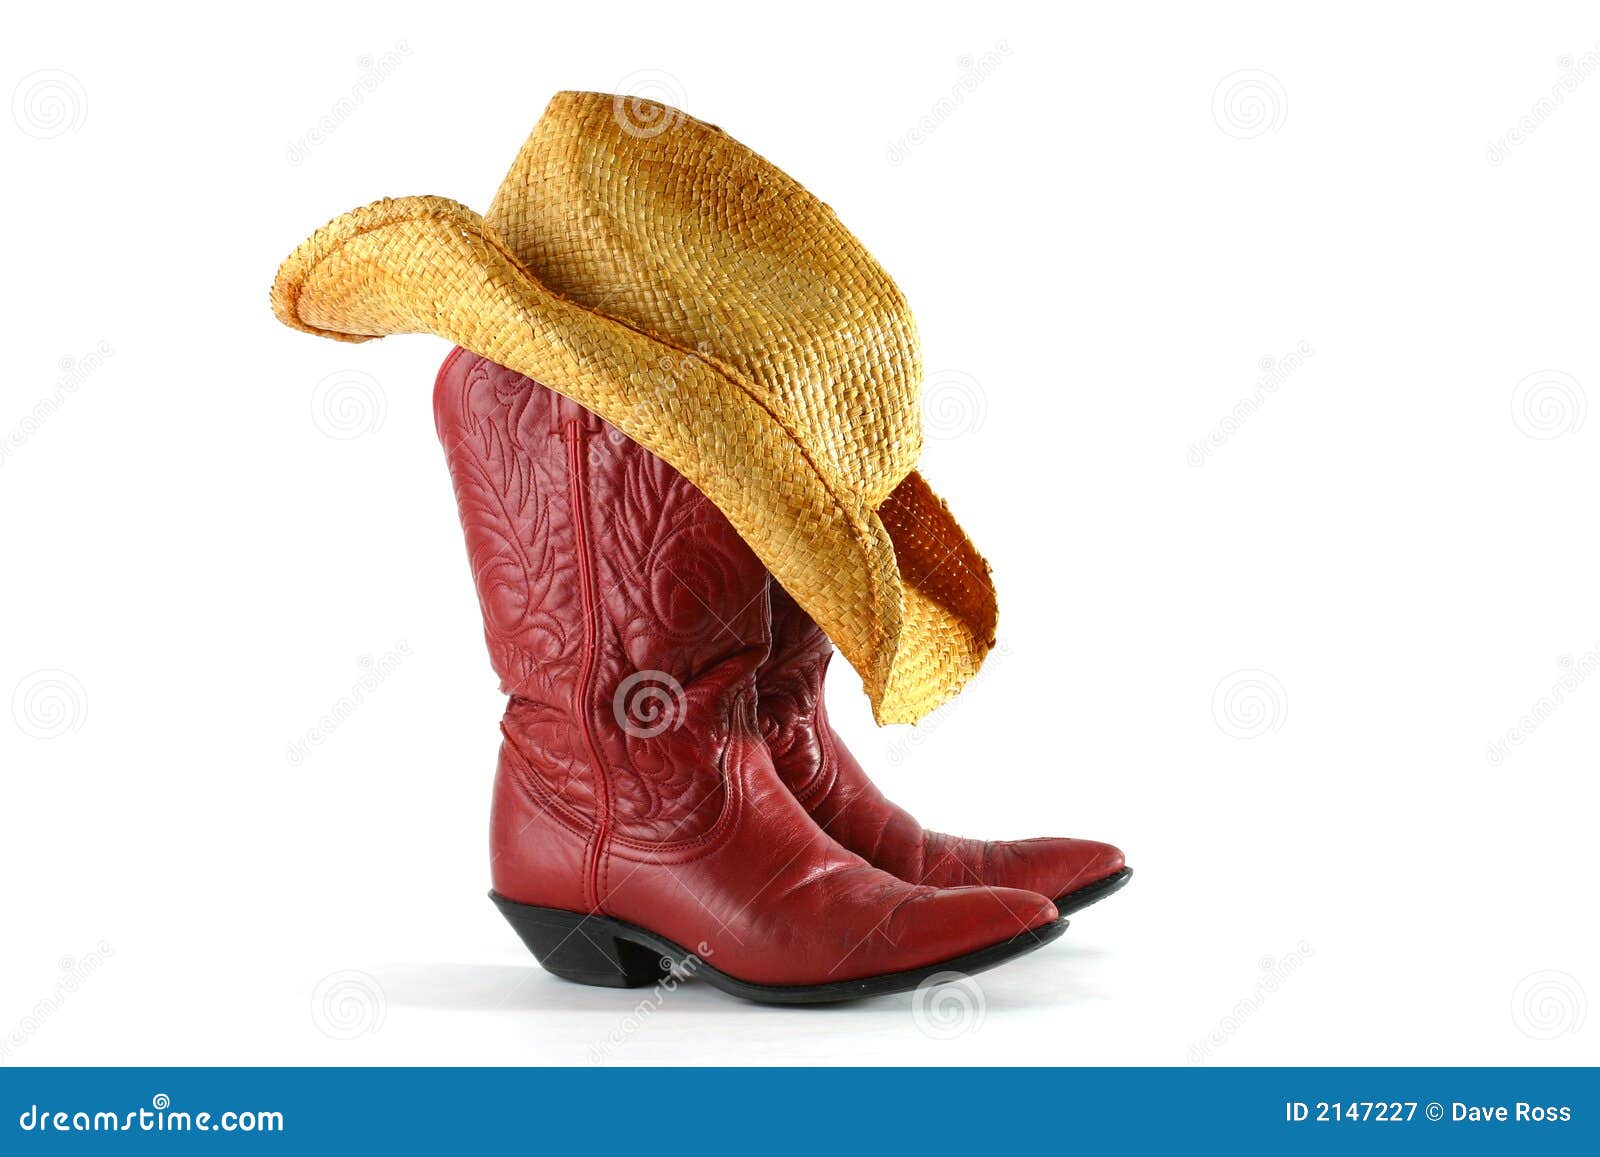 western boots and hat